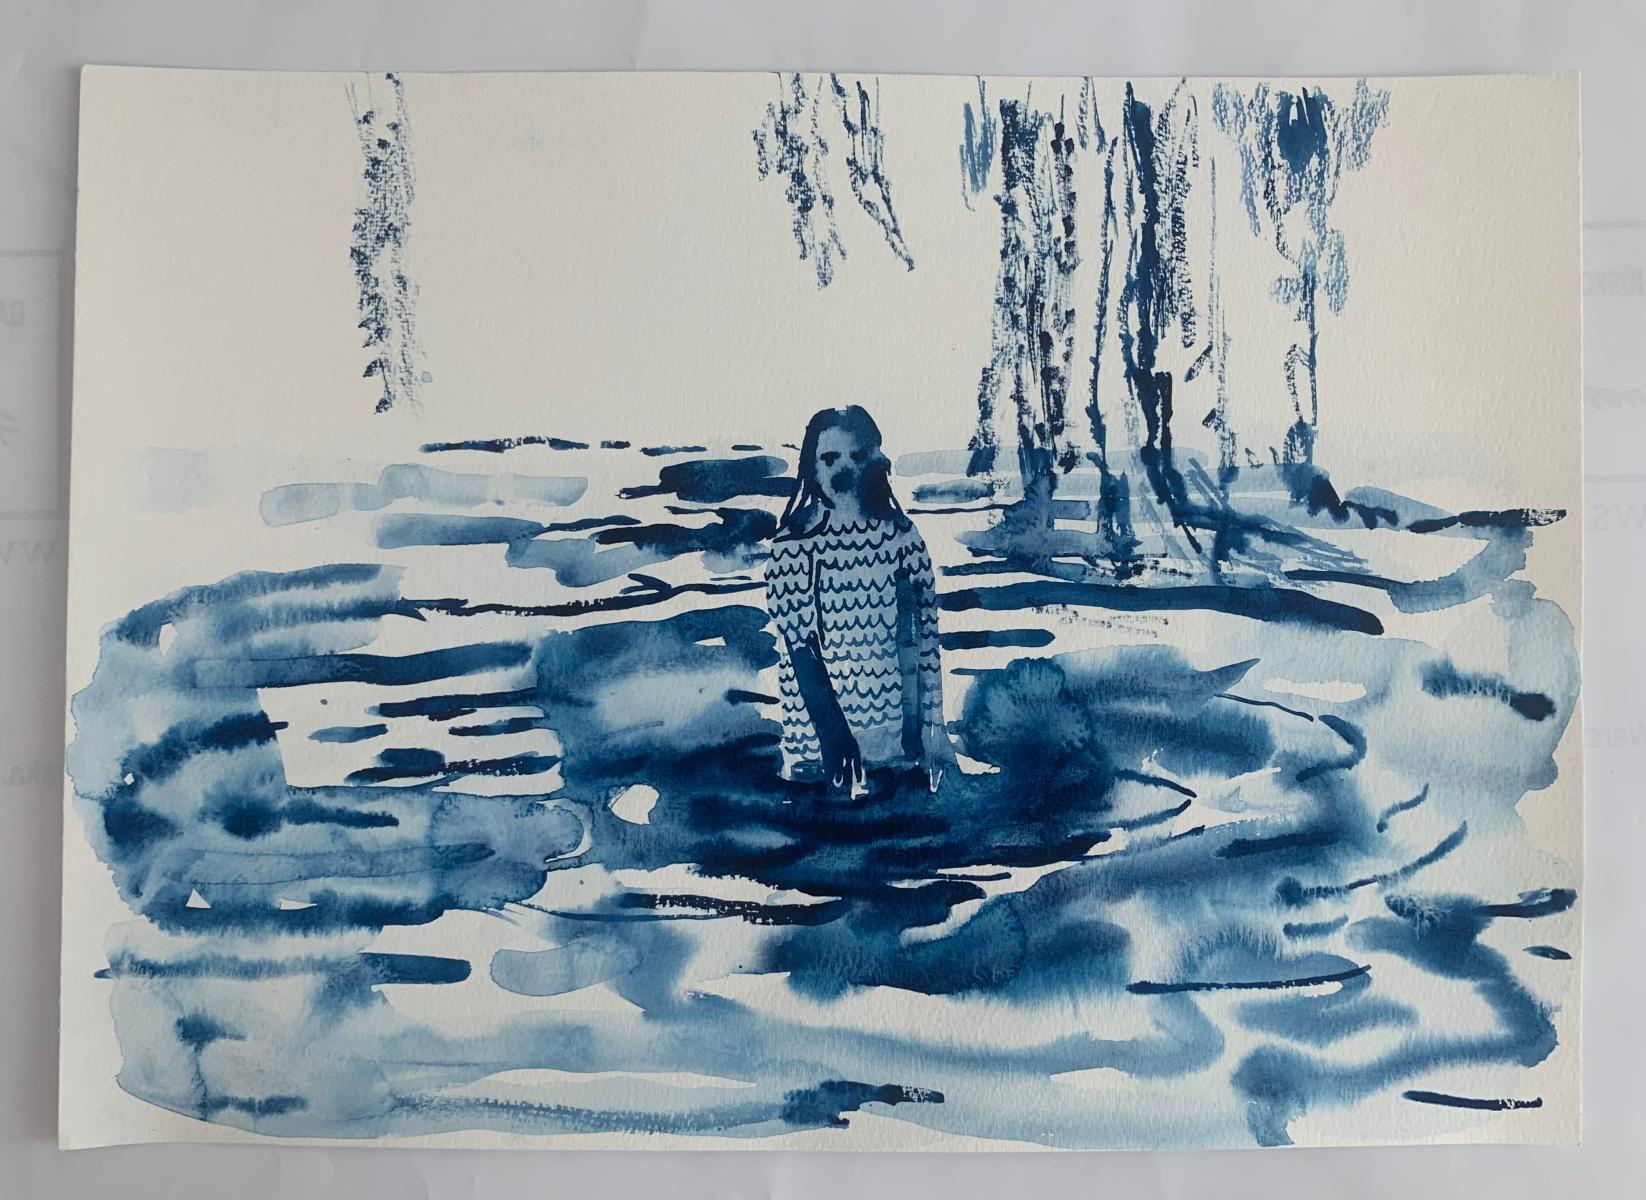 Contemporary figurative watercolor on paper painting by Polish artist living in Belgium Hanna Ilczyszyn. Artwork depicts woman standing in the water with tree leaves above her. Painting is monochromatic in blue. Title of the art piece is